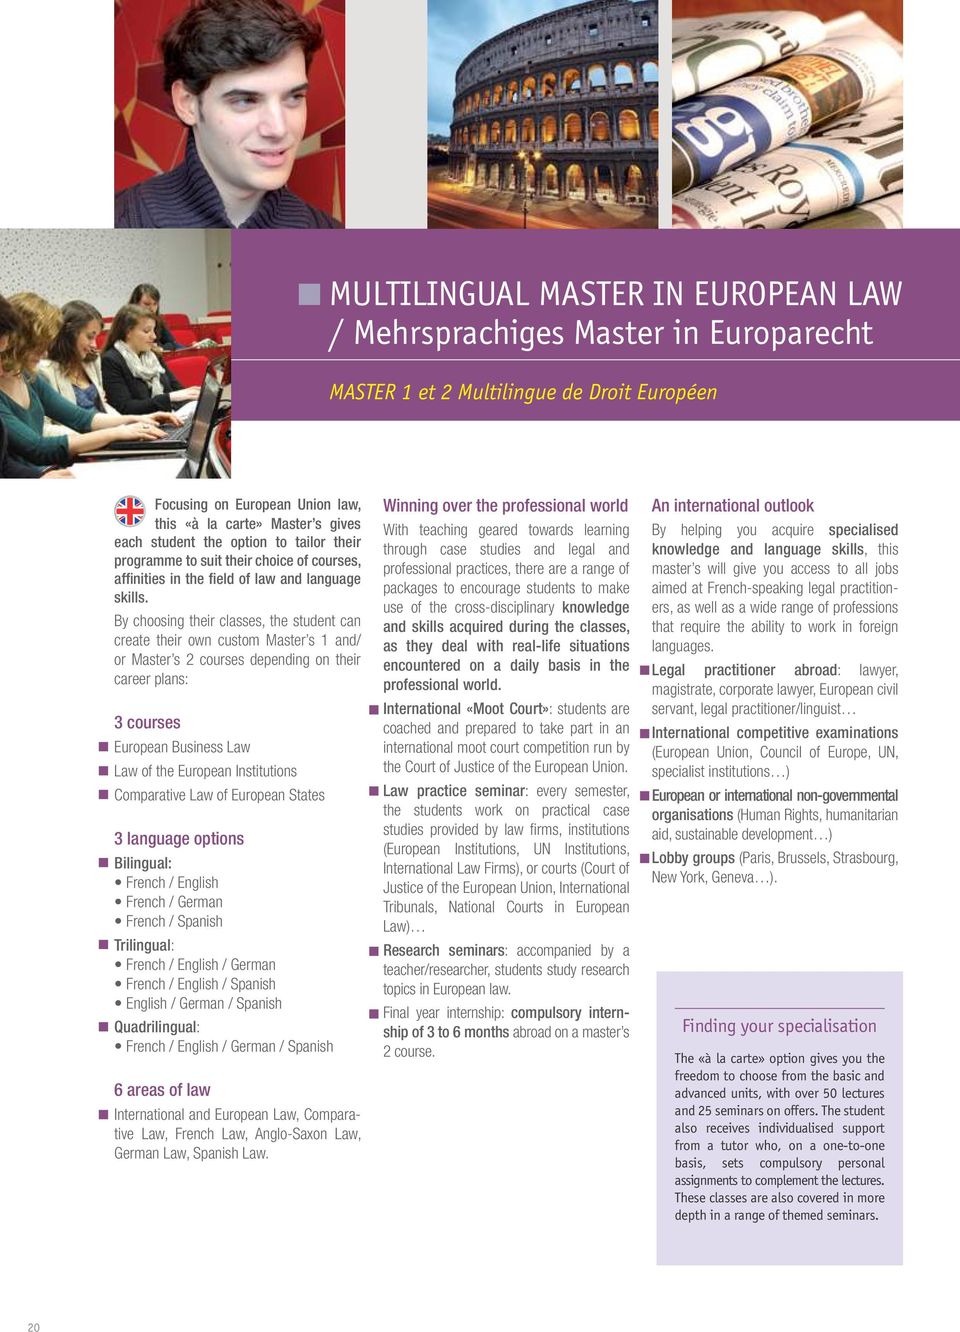 By choosing their classes, the student can create their own custom Master s 1 and/ or Master s 2 courses depending on their career plans: 3 courses European Business Law Law of the European